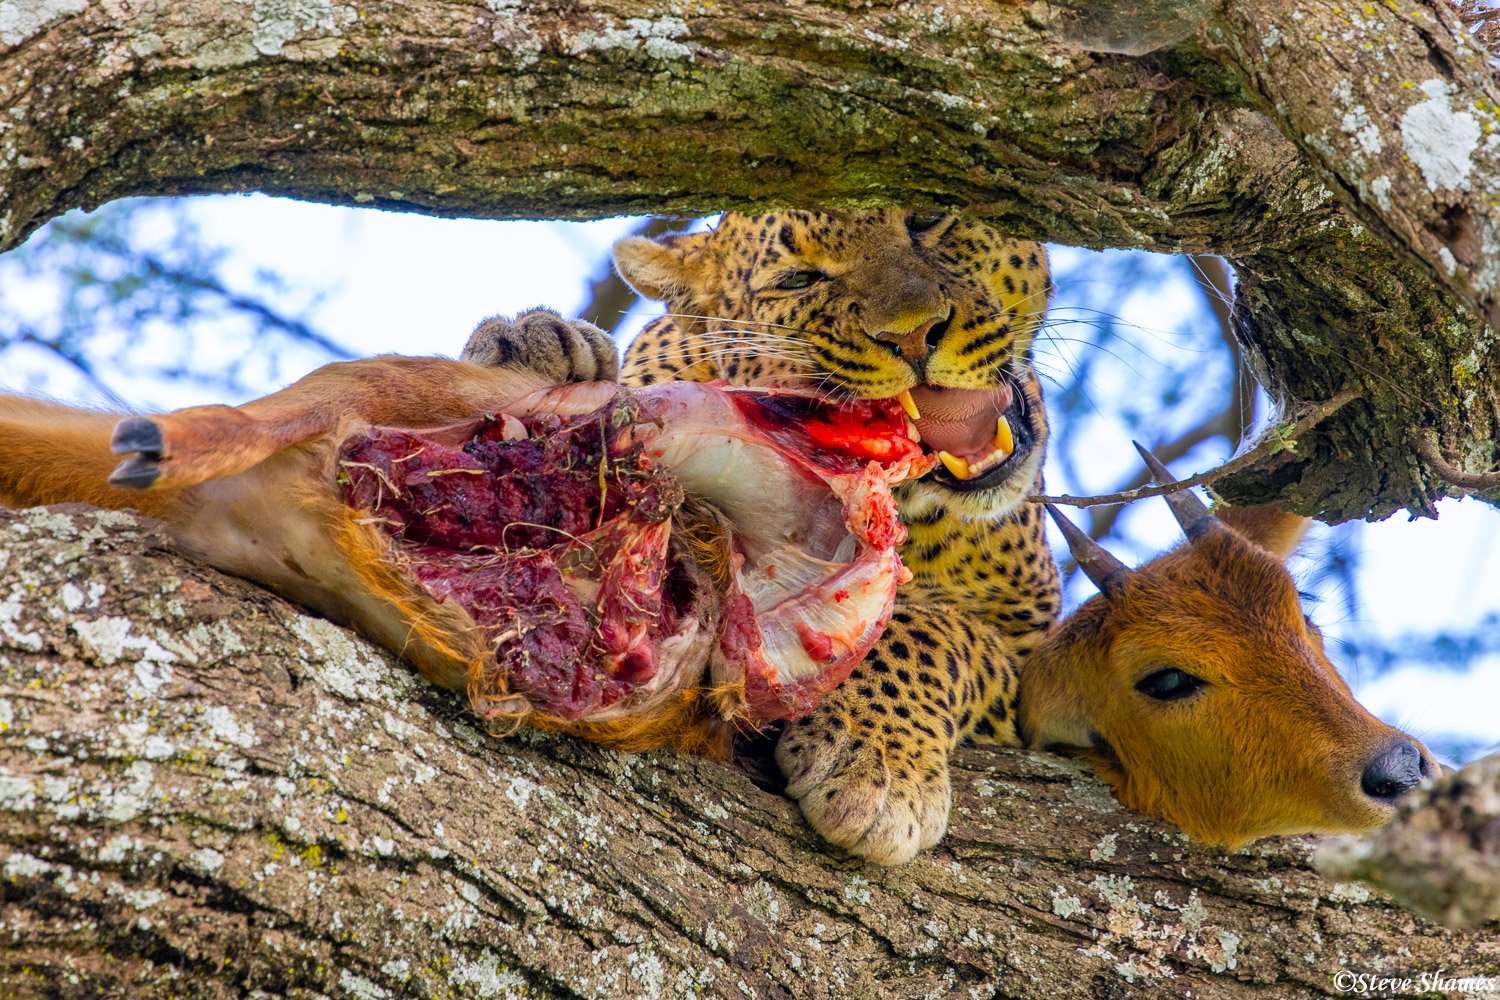 This leopard caught herself a reedbuck. Makes a meal for a couple of days.